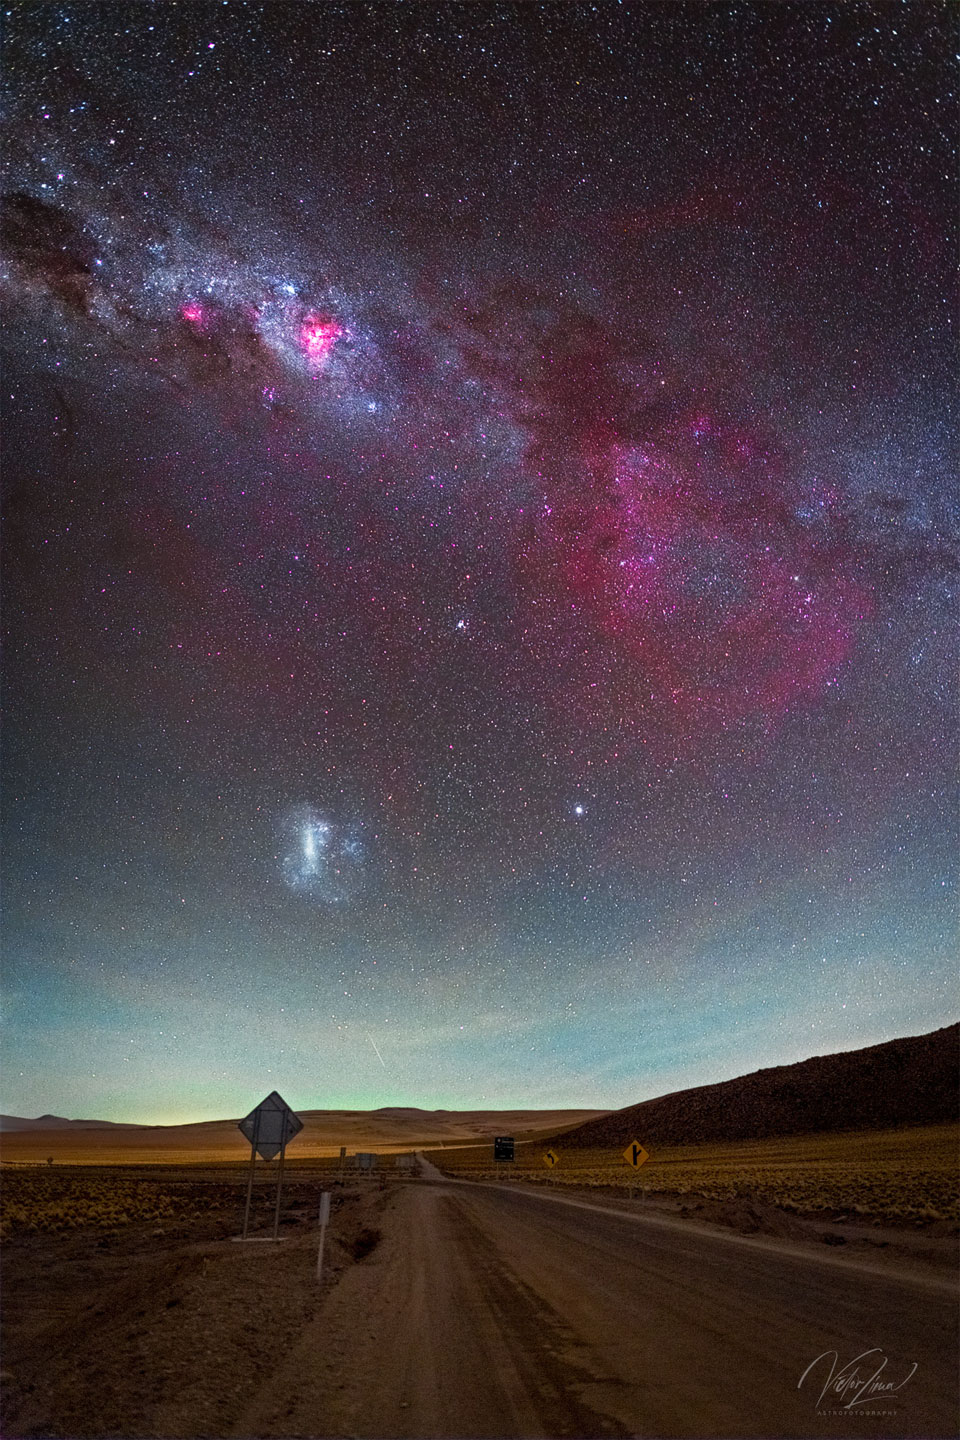 The featured image shows a grand skyscape with a 
brown desert road in the foreground and a sky containing
the Milky Way galactic band complete with a large red 
glow on the right which is the dim Gum Nebula. The
LMC galaxy is also visible. 
Please see the explanation for more detailed information.